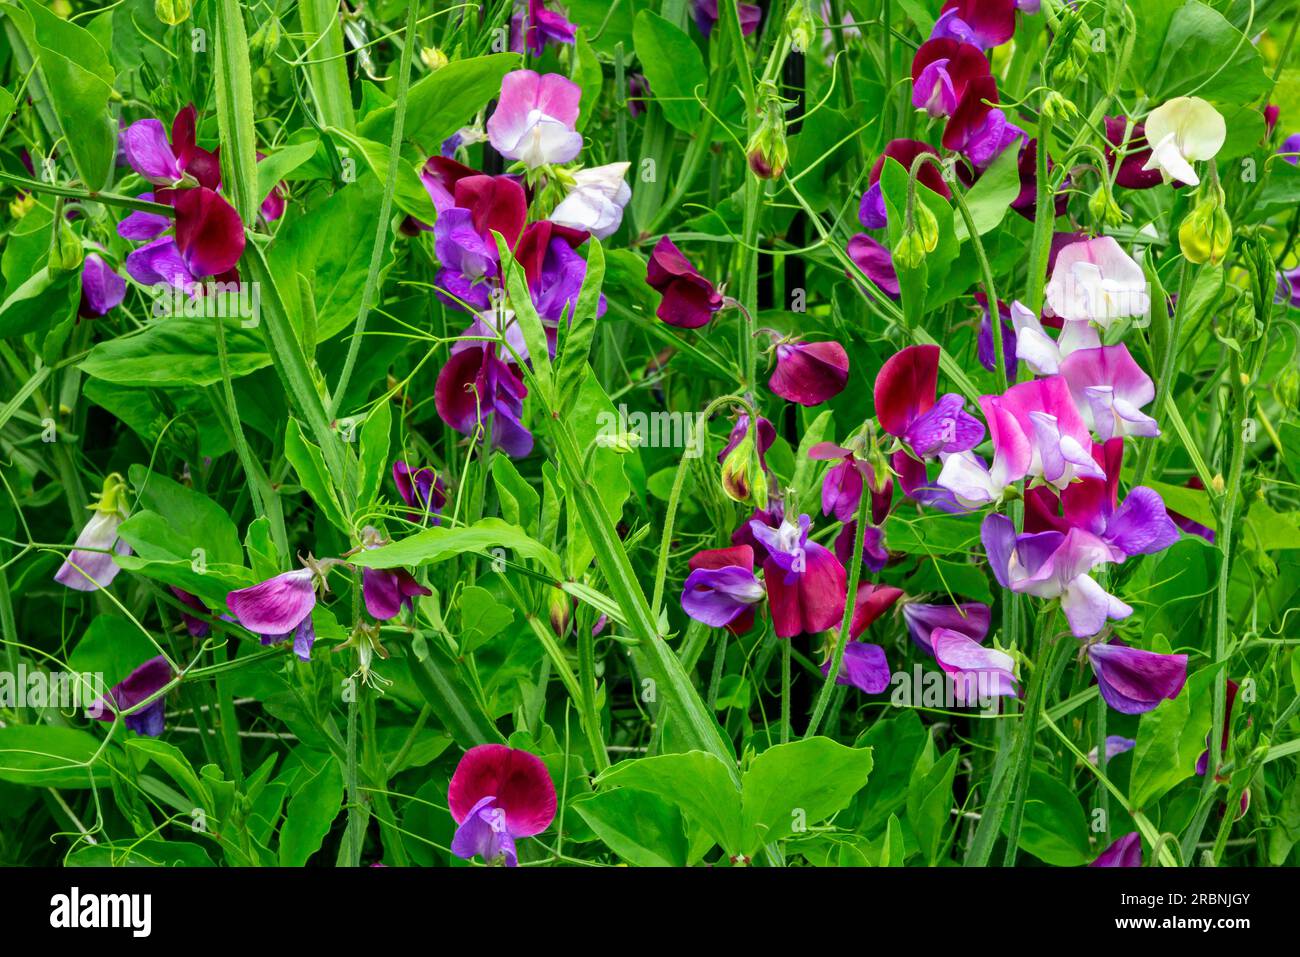 Sweet pea, Lathyrus odoratus, is a flowering plant in the genus Lathyrus in the family Fabaceae (legumes), native to southern Europe. Stock Photo